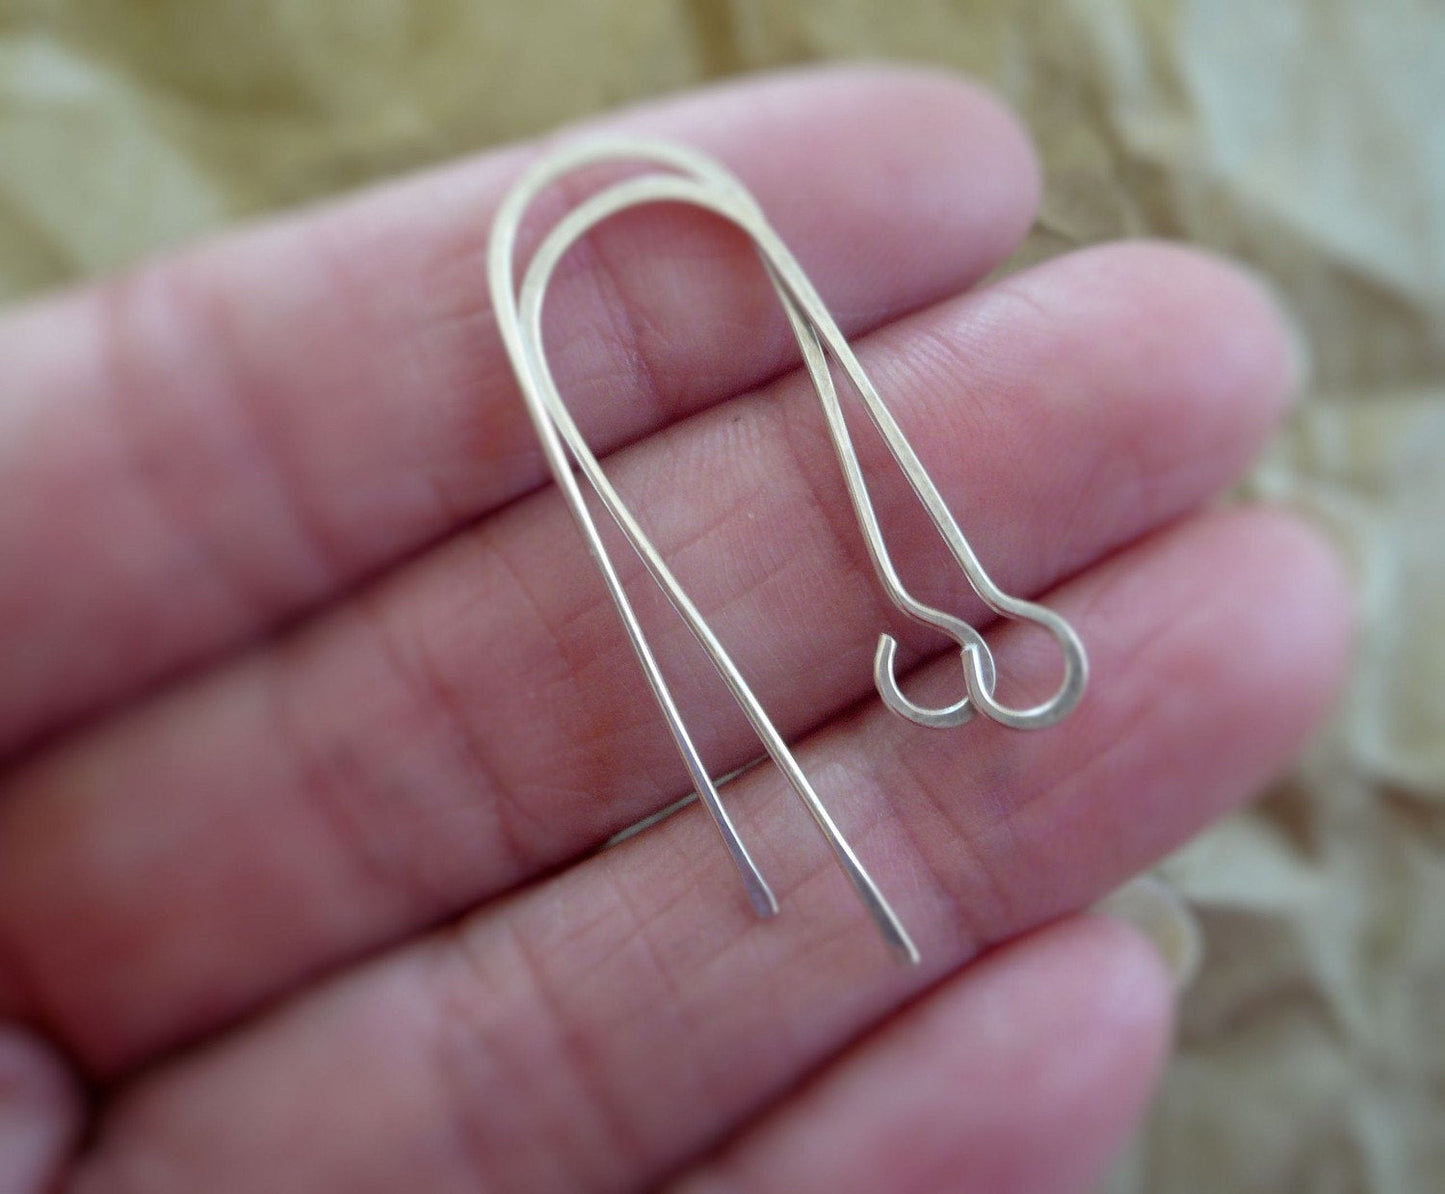 12 Pairs of my Minimalist Sterling Silver Earwires - Handmade. Handforged. Heavily Oxidized